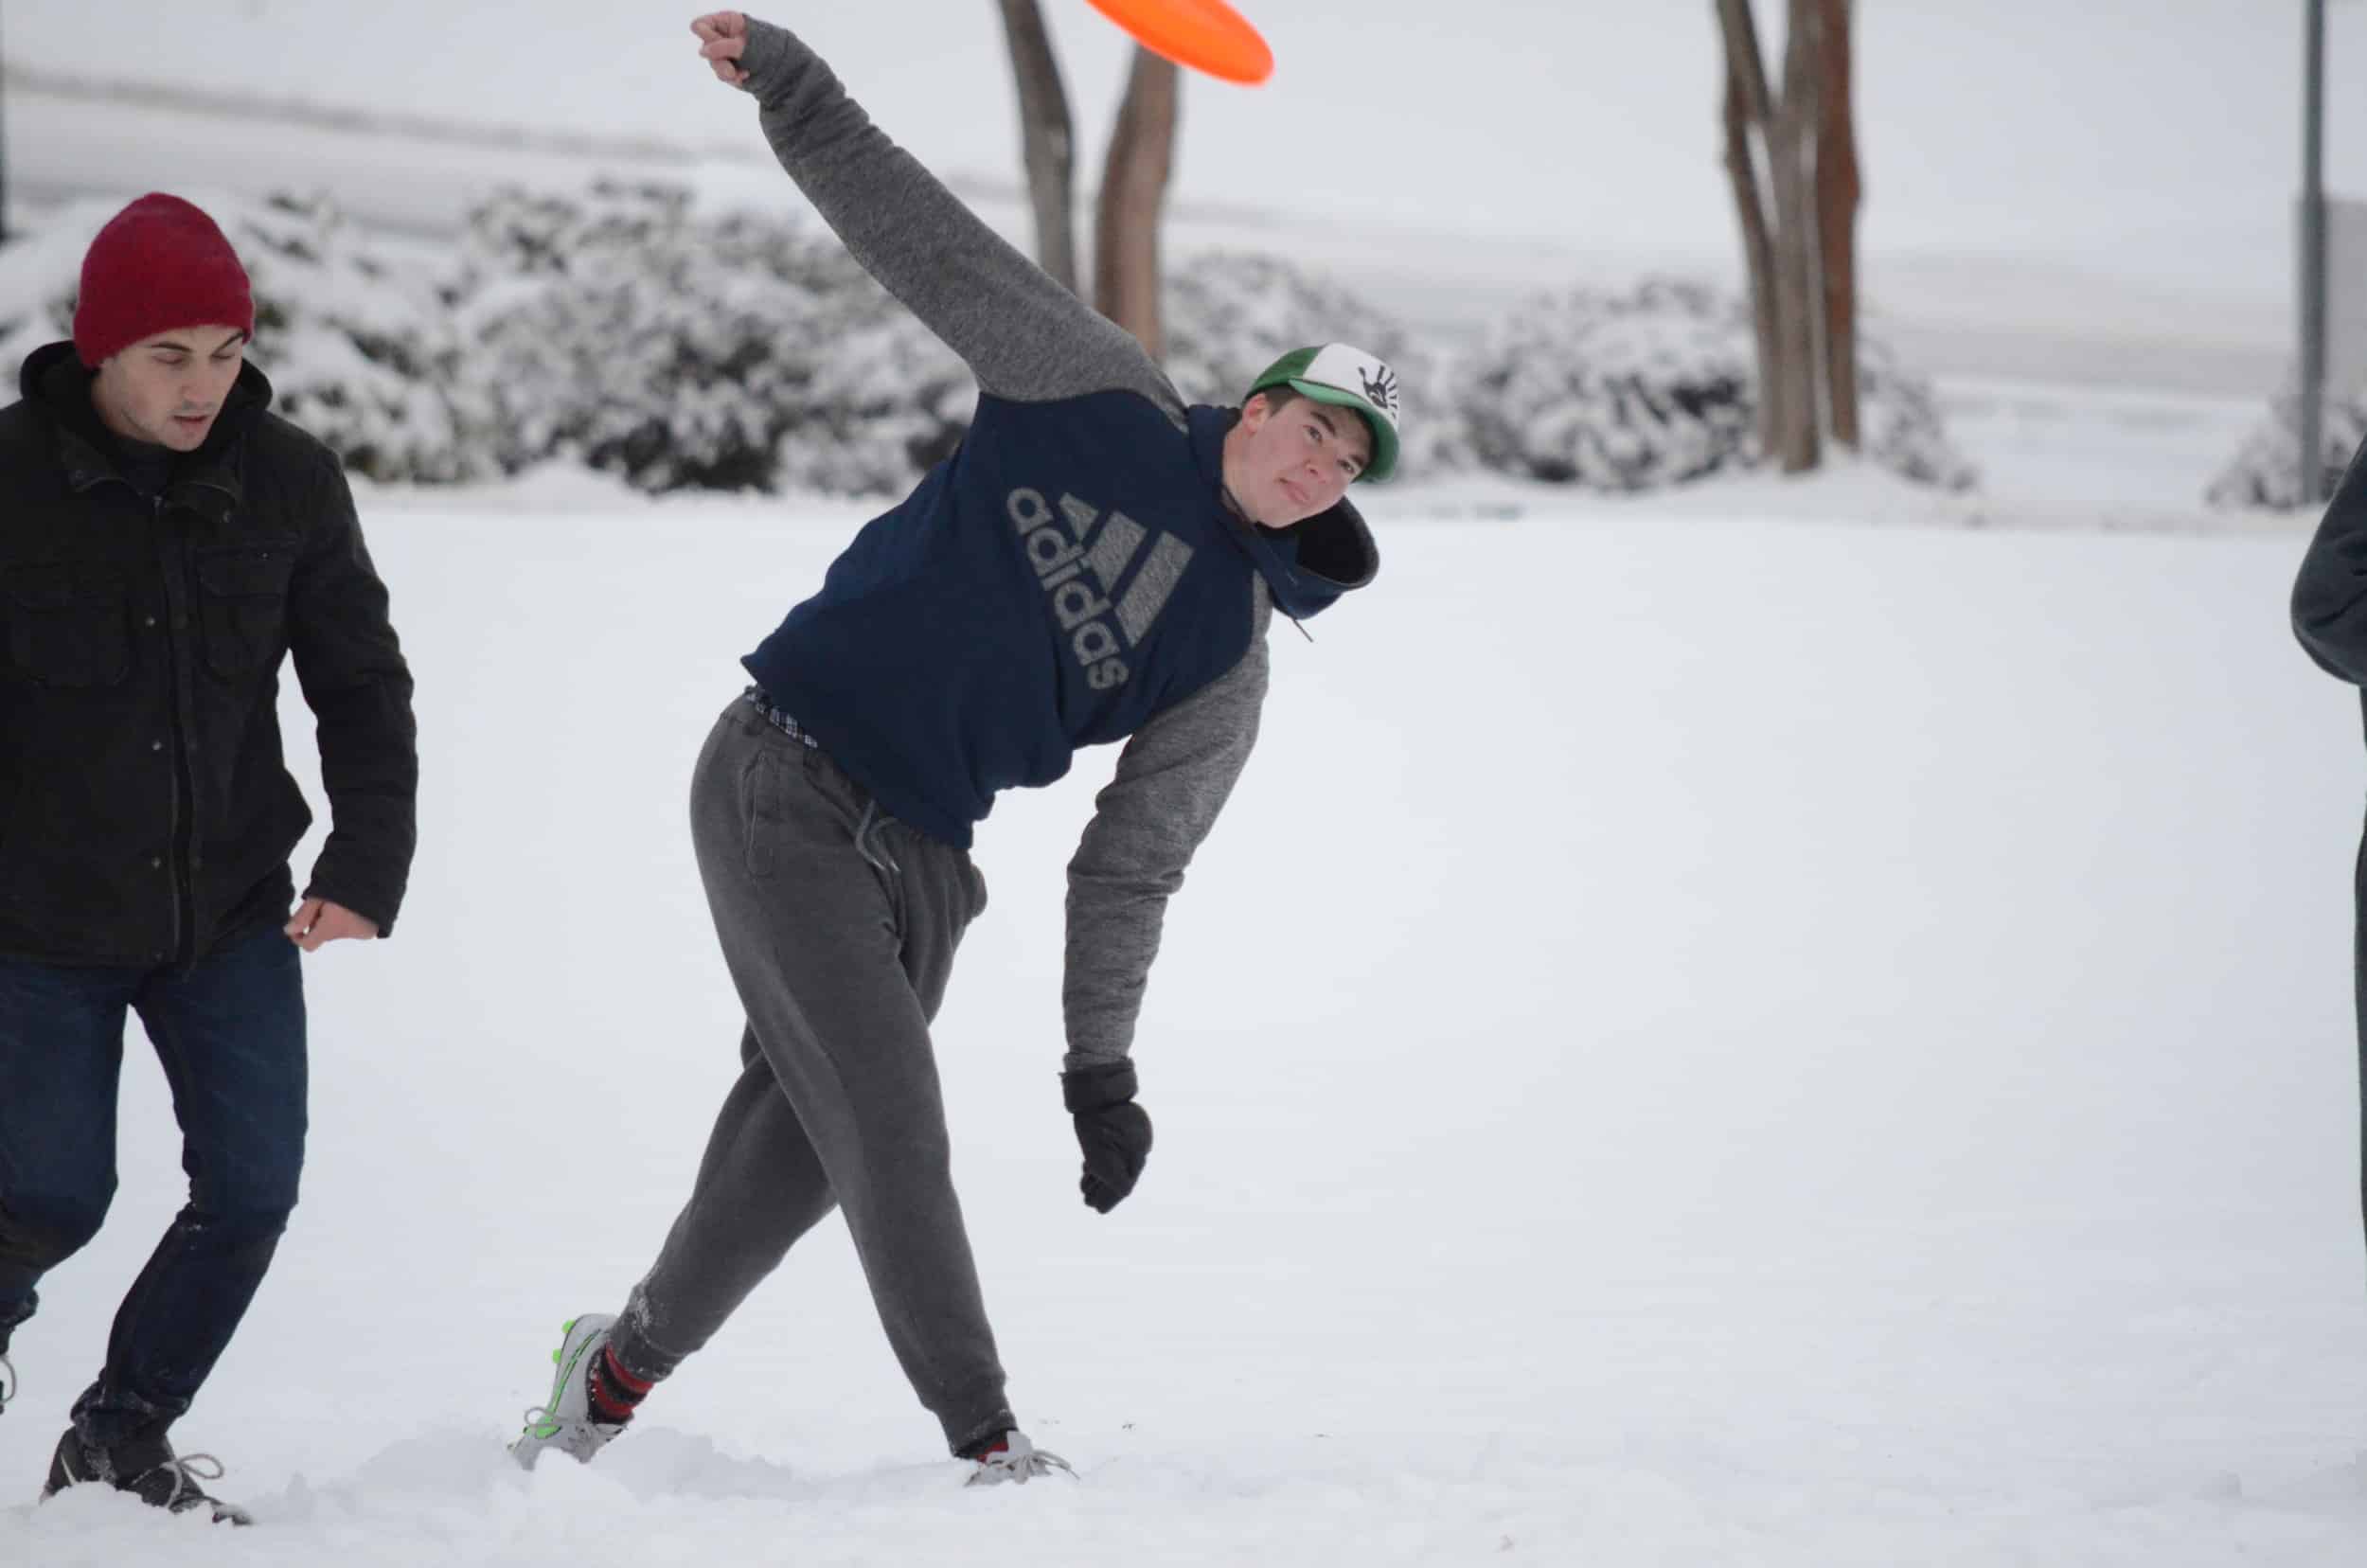 Josh Leister loves playing Ultimate Frisbee, even in cold conditions.Photo by: Rebecca Meek